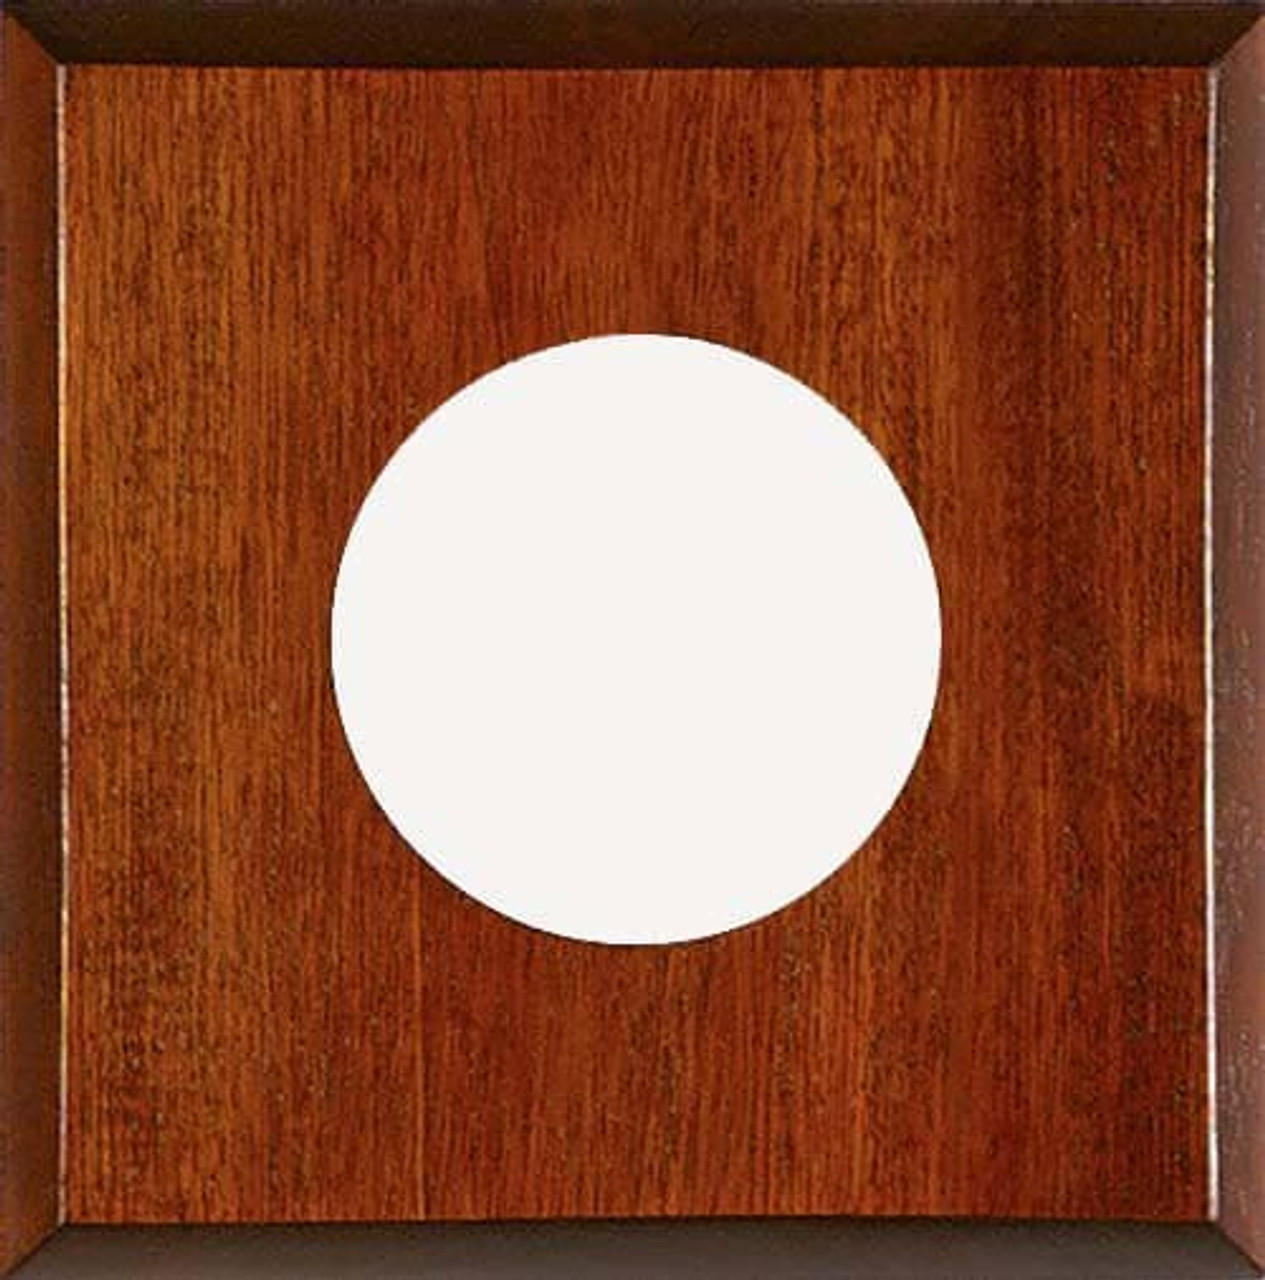 Mahogany Panel Mount for Mystic Digital Thermometer and Barometer Instrument